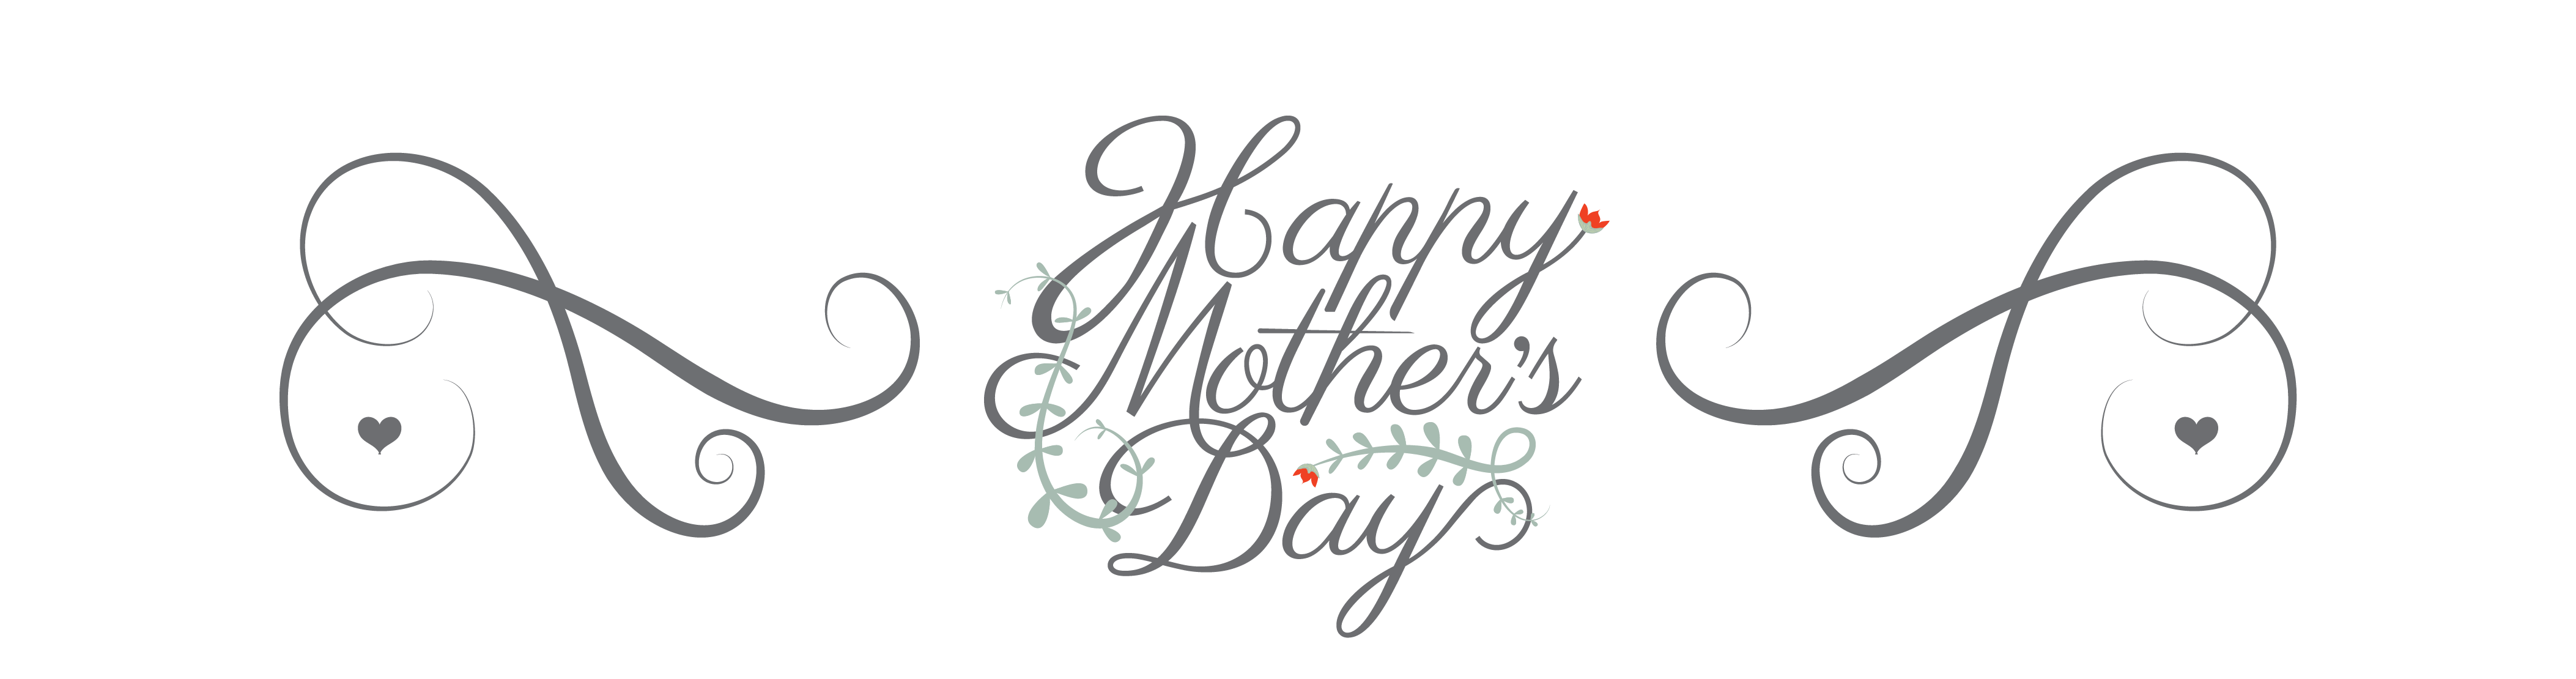 clipart banner mothers day